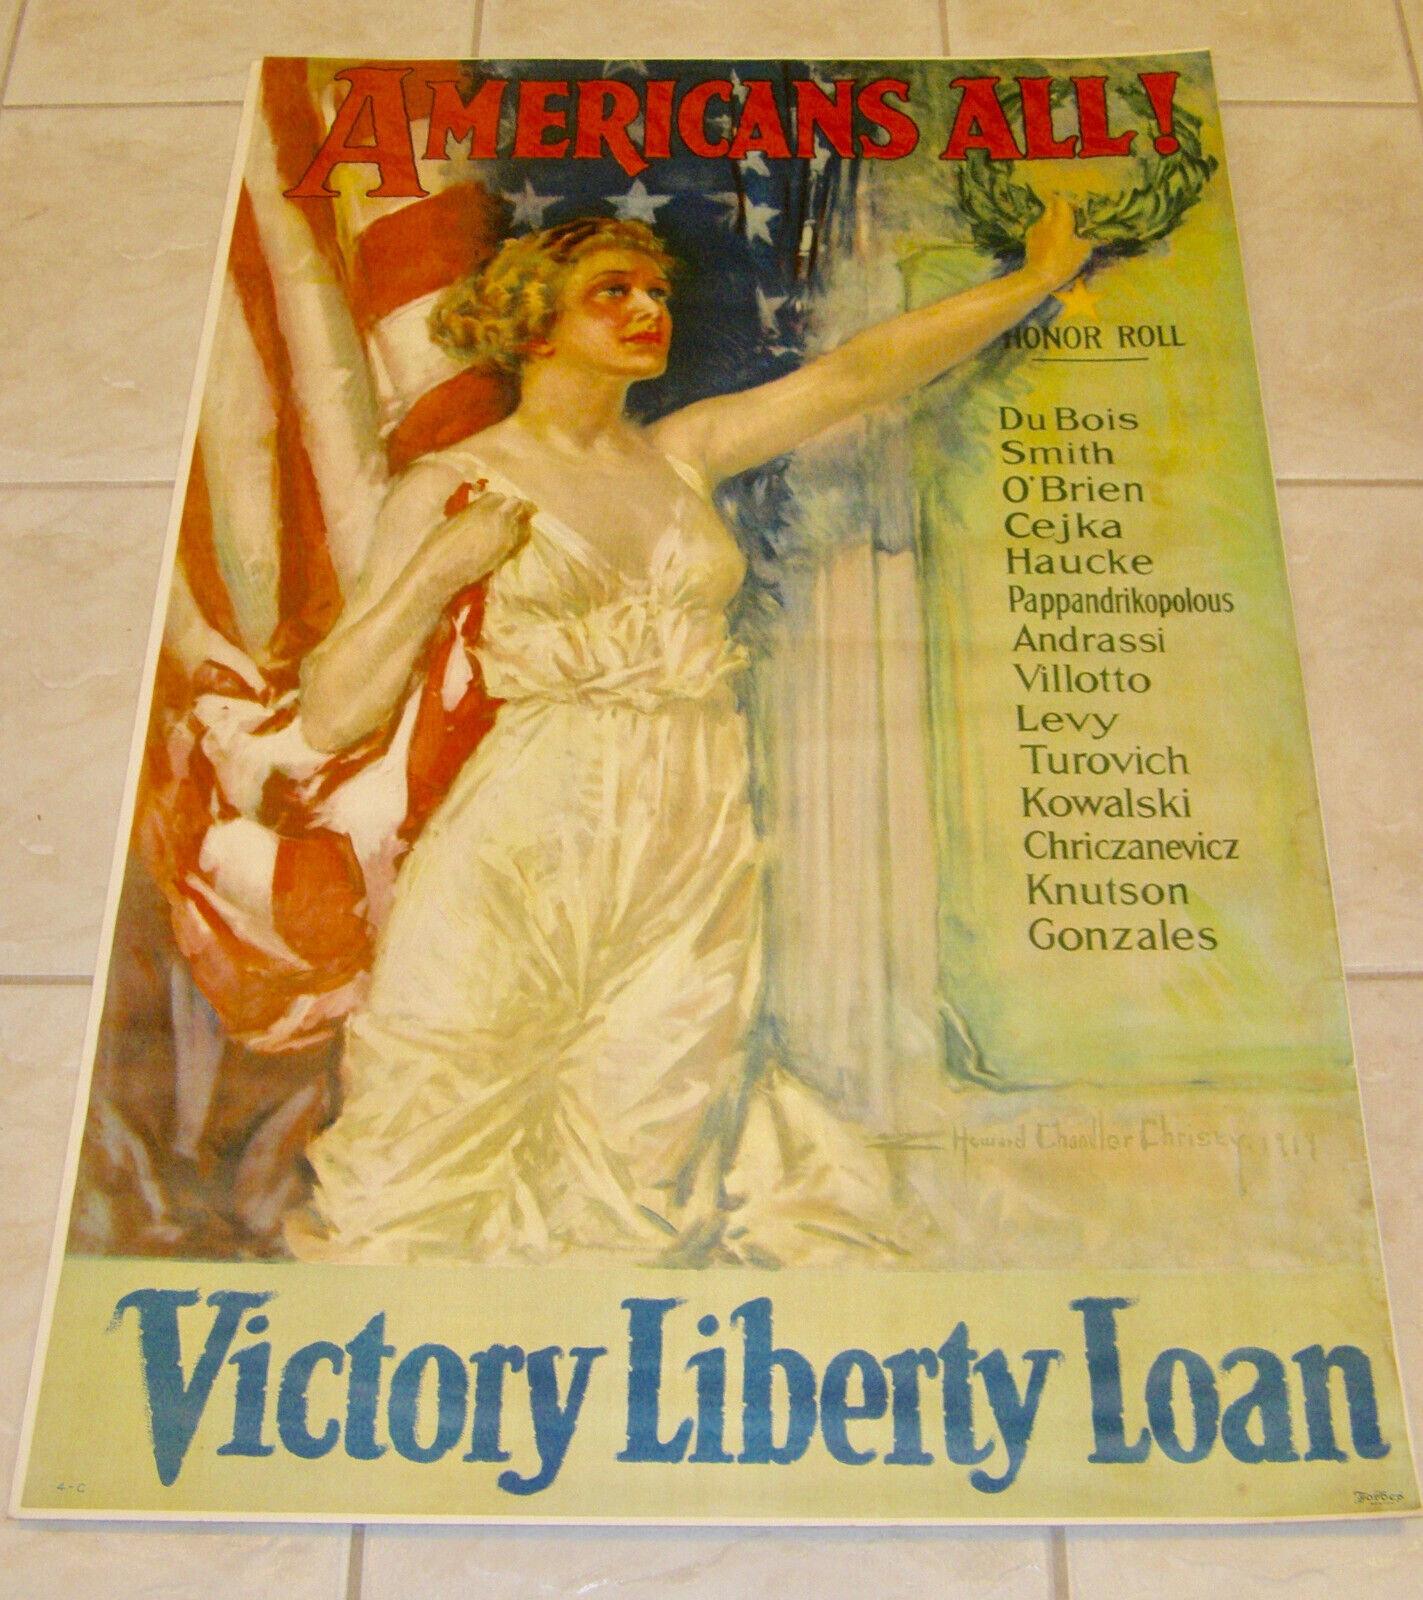 WWI VINTAGE ORIGINAL 1919 POSTER ‘AMERICANS ALL,VICTORY LIBERTY LOAN’ ByCHRISTY